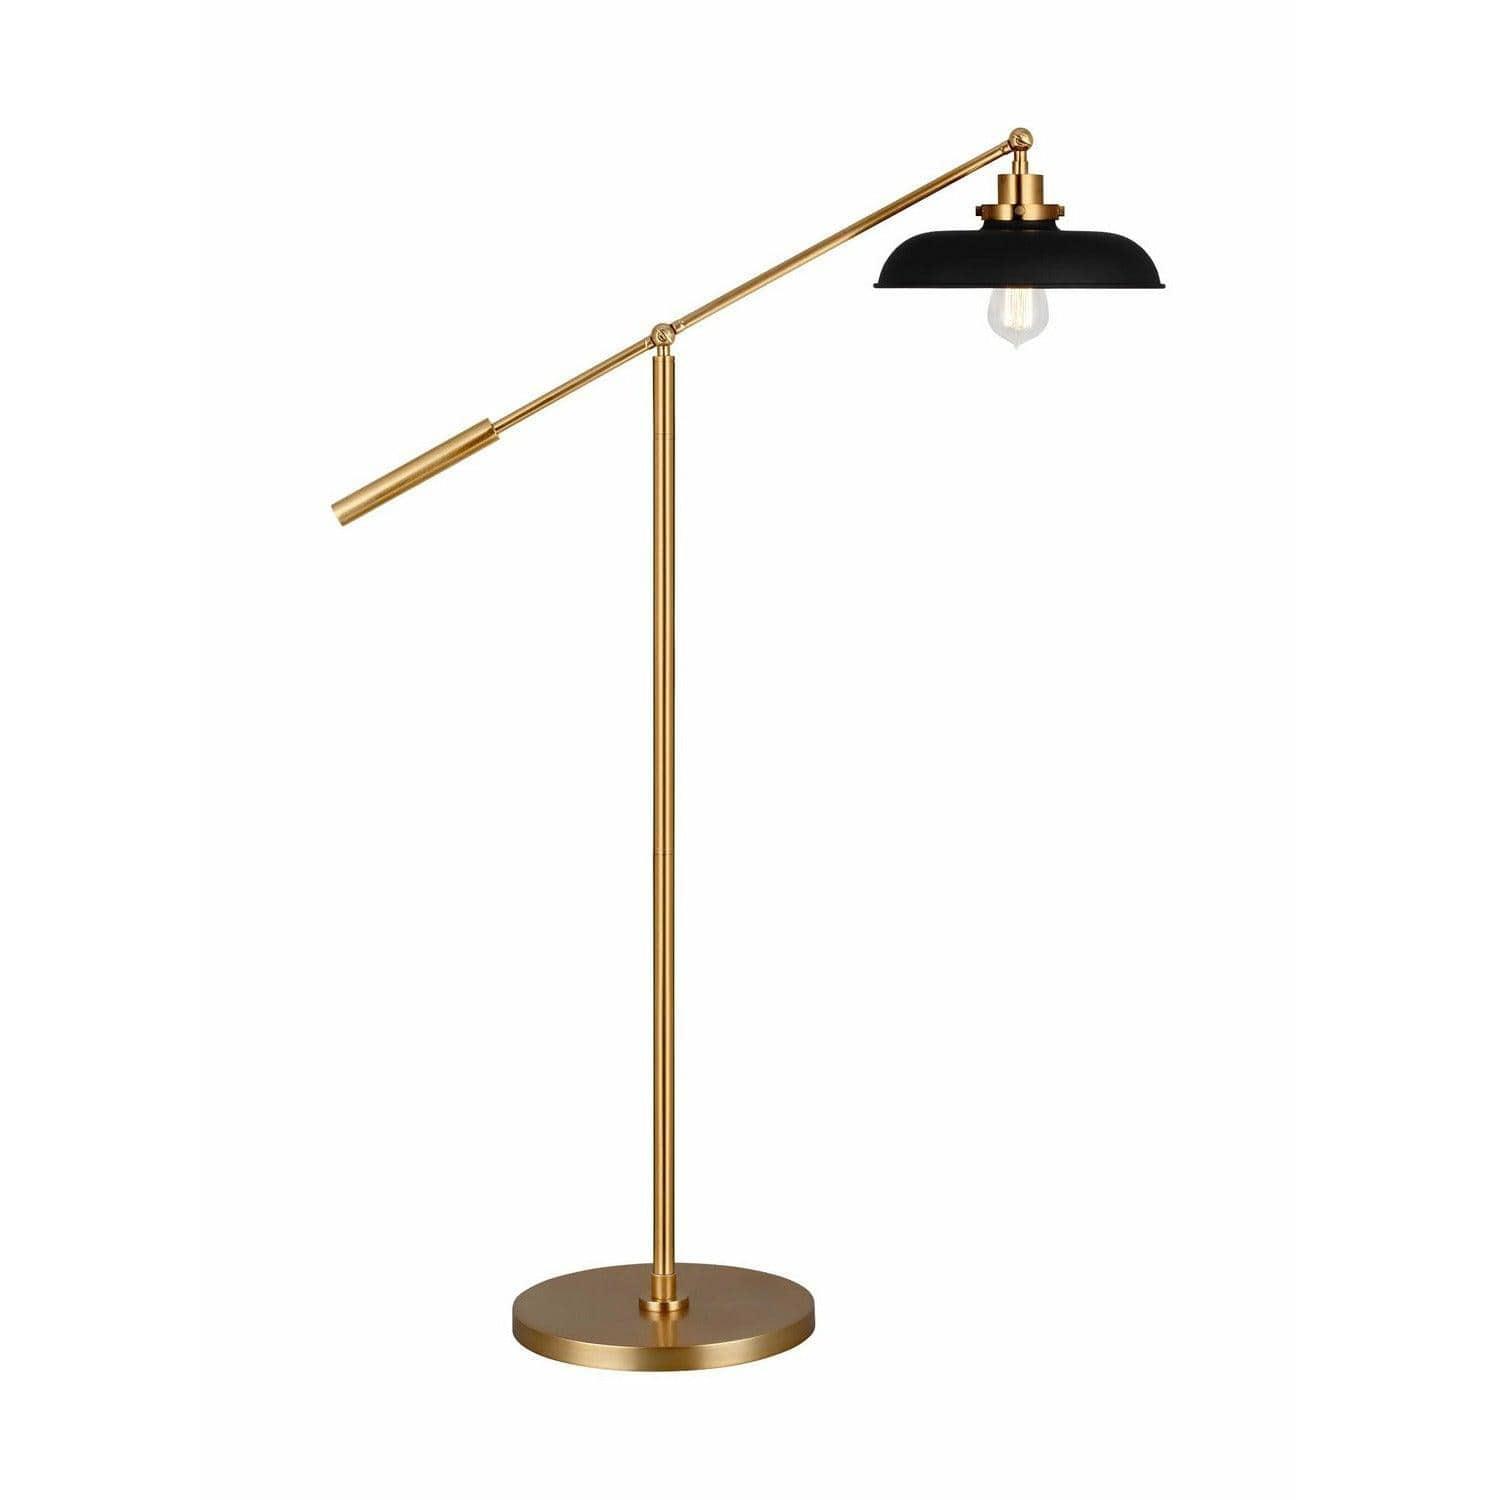 Cotra Table Lamp  Visual Comfort Studio Collection - Montreal